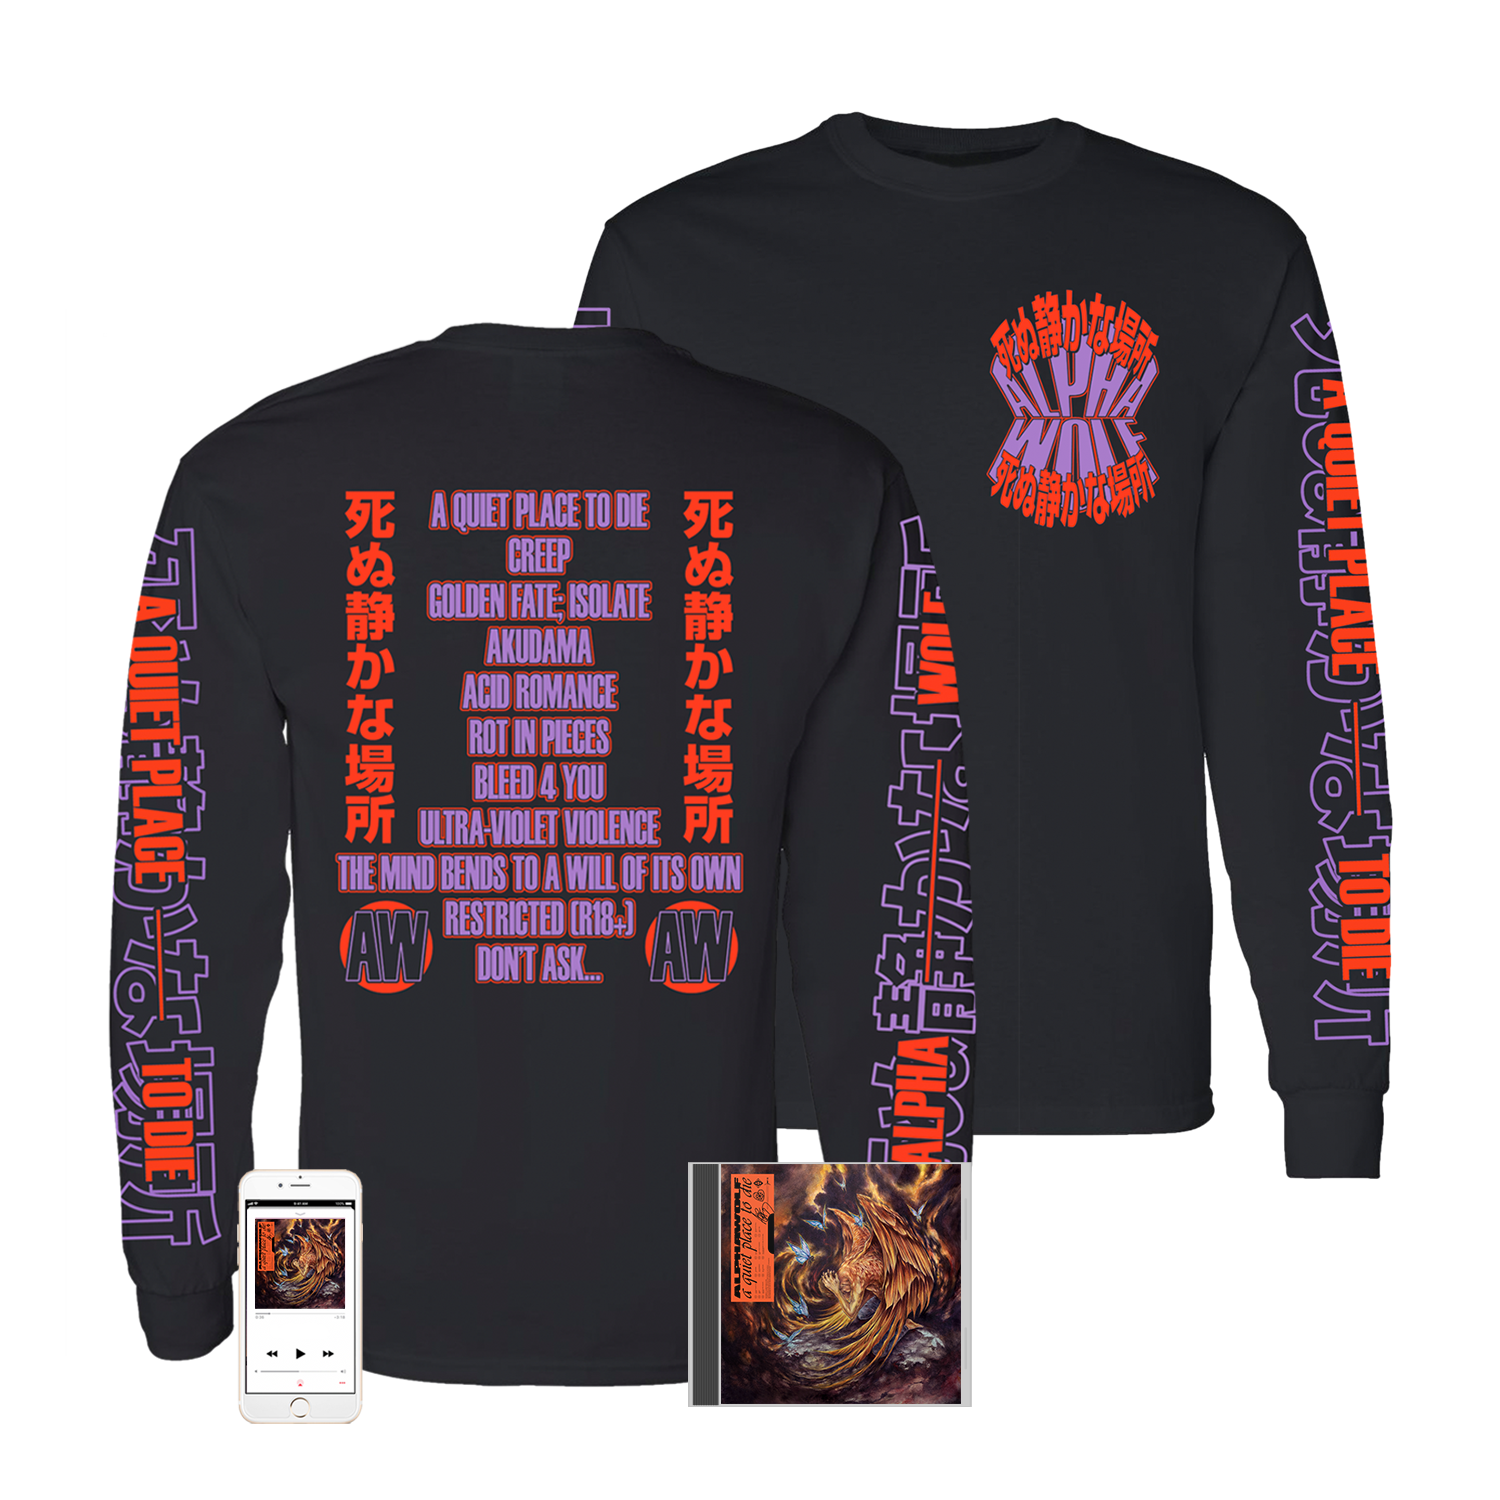 Alpha Wolf - 'A Quiet Place To Die' Track List Long Sleeve Pre-Order Bundle